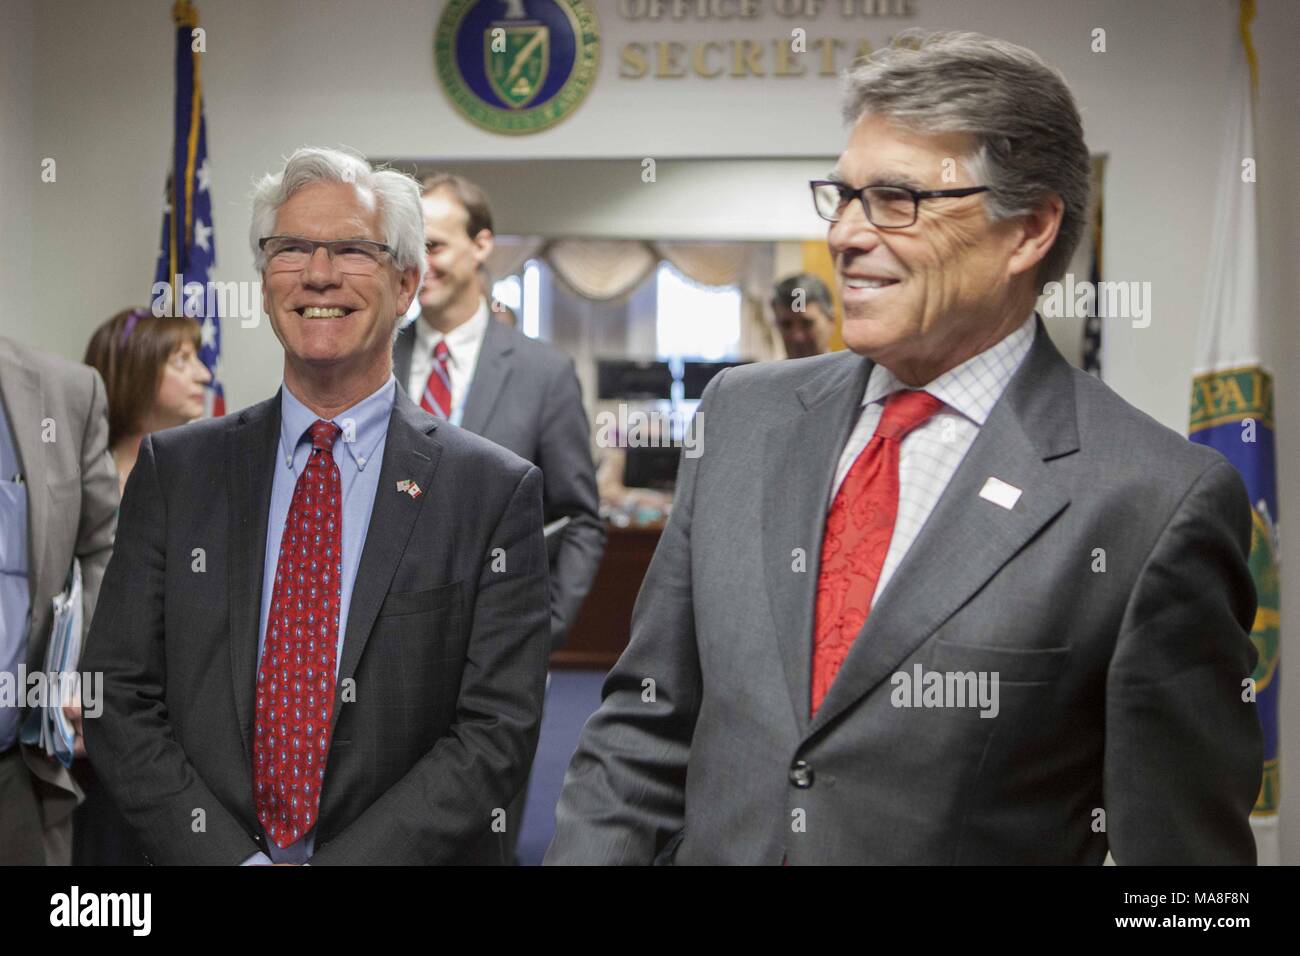 United States Department of Energy Secretary Rick Perry, standing right and slightly in the foreground, with Canada's Minister of Natural Resources, James Gordon Carr, March 30, 2017, image courtesy of the US Department of Energy, March 29, 2017. () Stock Photo